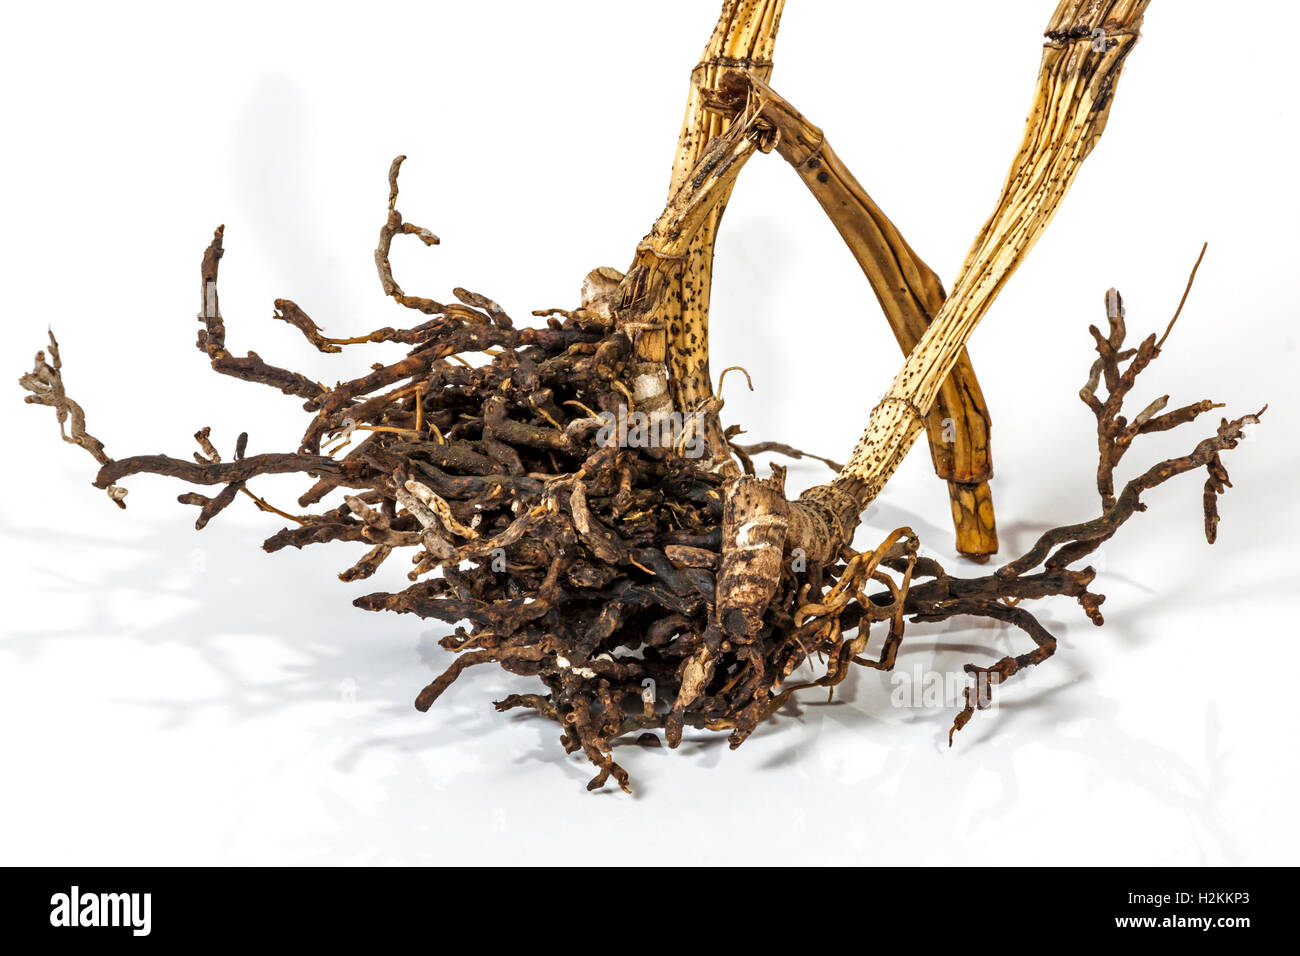 Studio shot close up view of dead dry pseudo bulbs and roots of a cattleya orchid on white Stock Photo